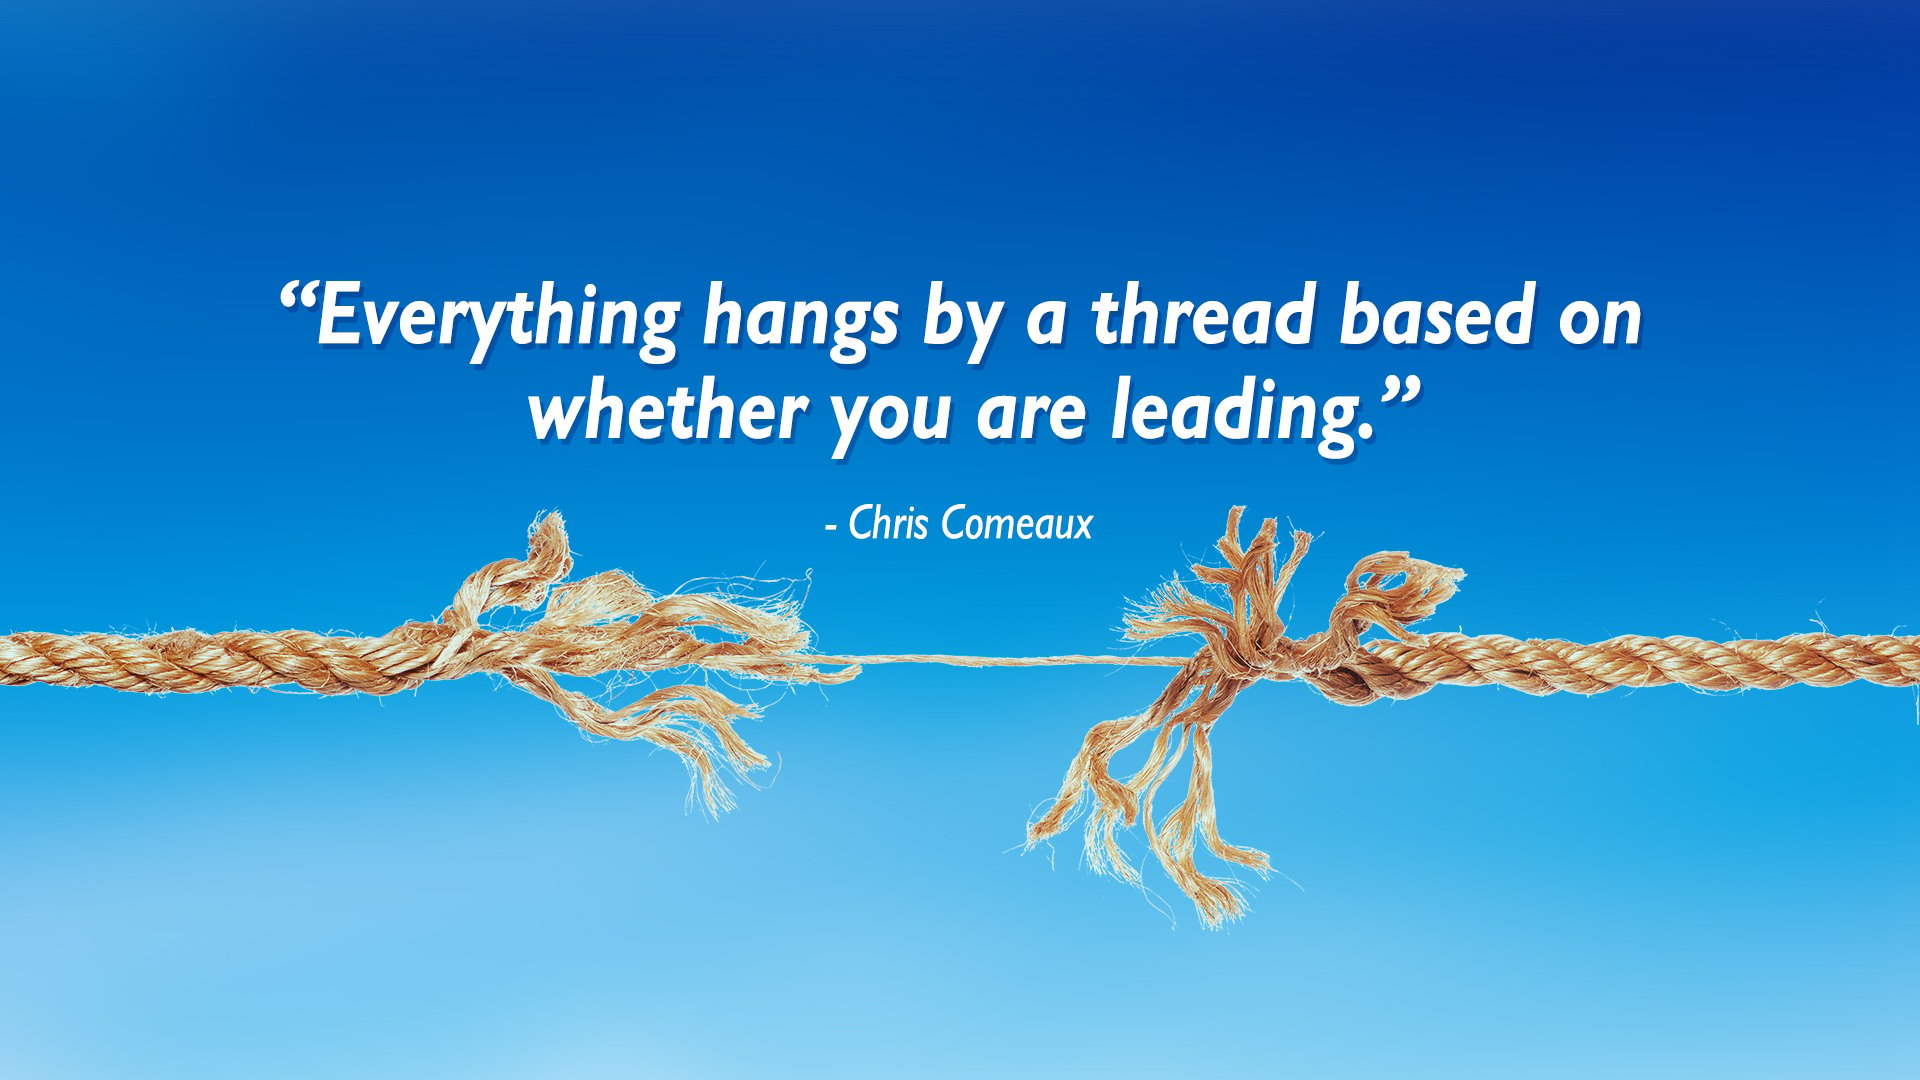 Everything hangs by a thread based on whether you are leading. - Chris Comeauc